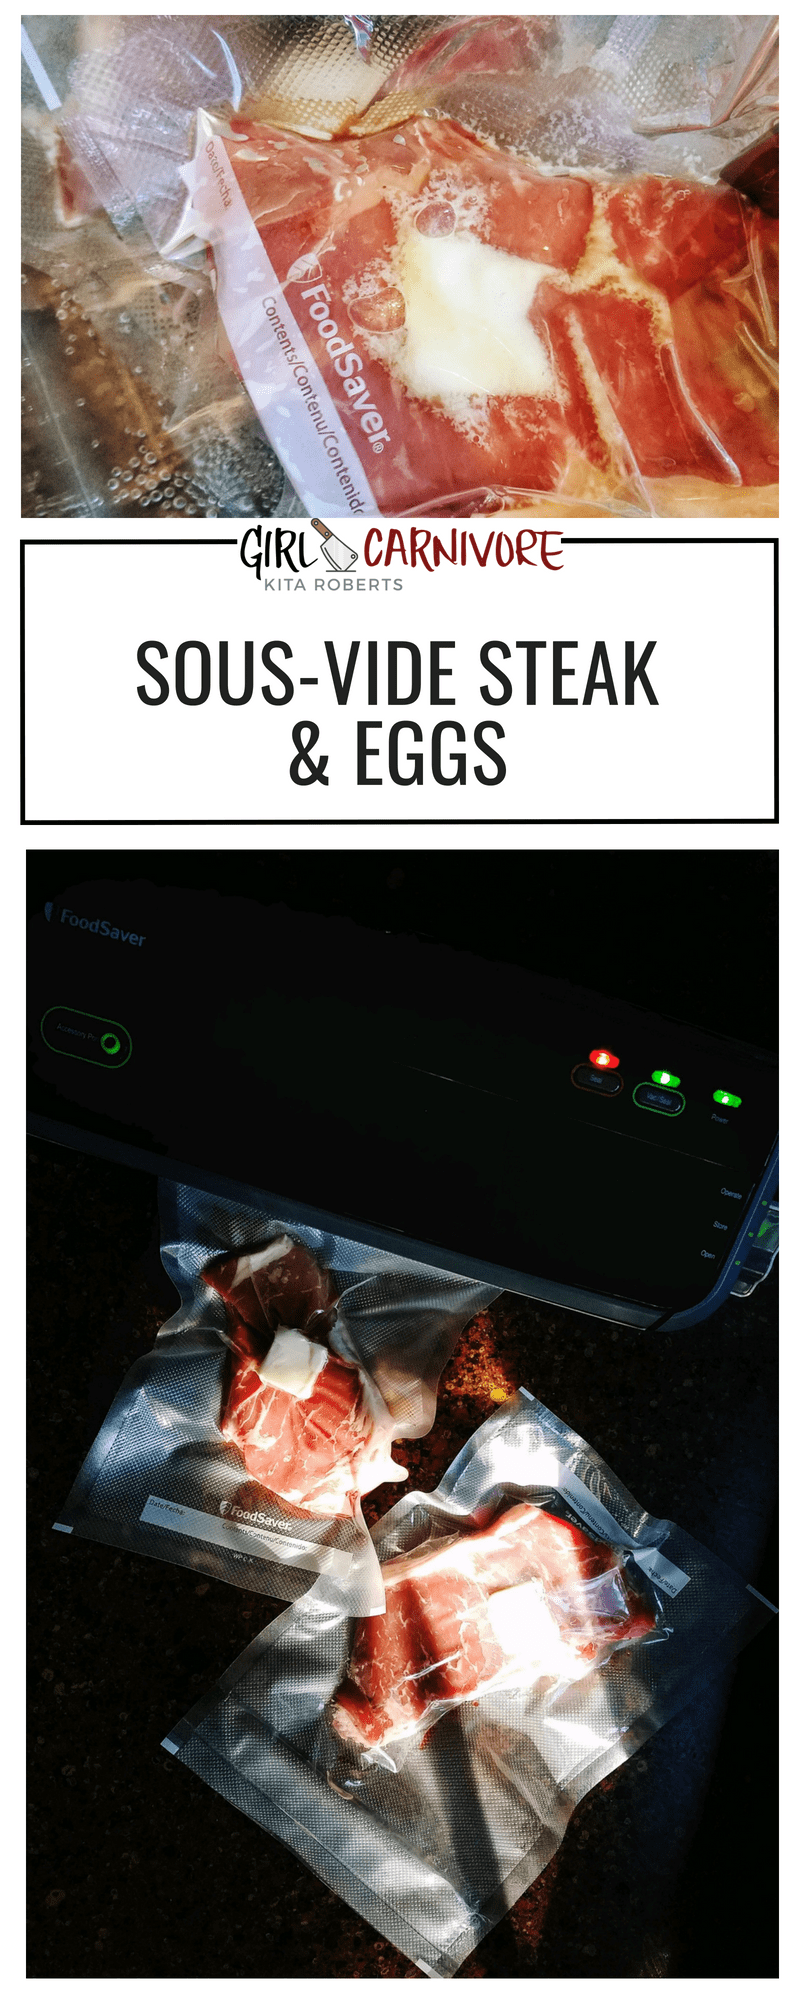 Sous-Vide Steak and Eggs - a perfect introduction recipe for sous-vide cooking using the FoodSaver System and Vacuum Bags